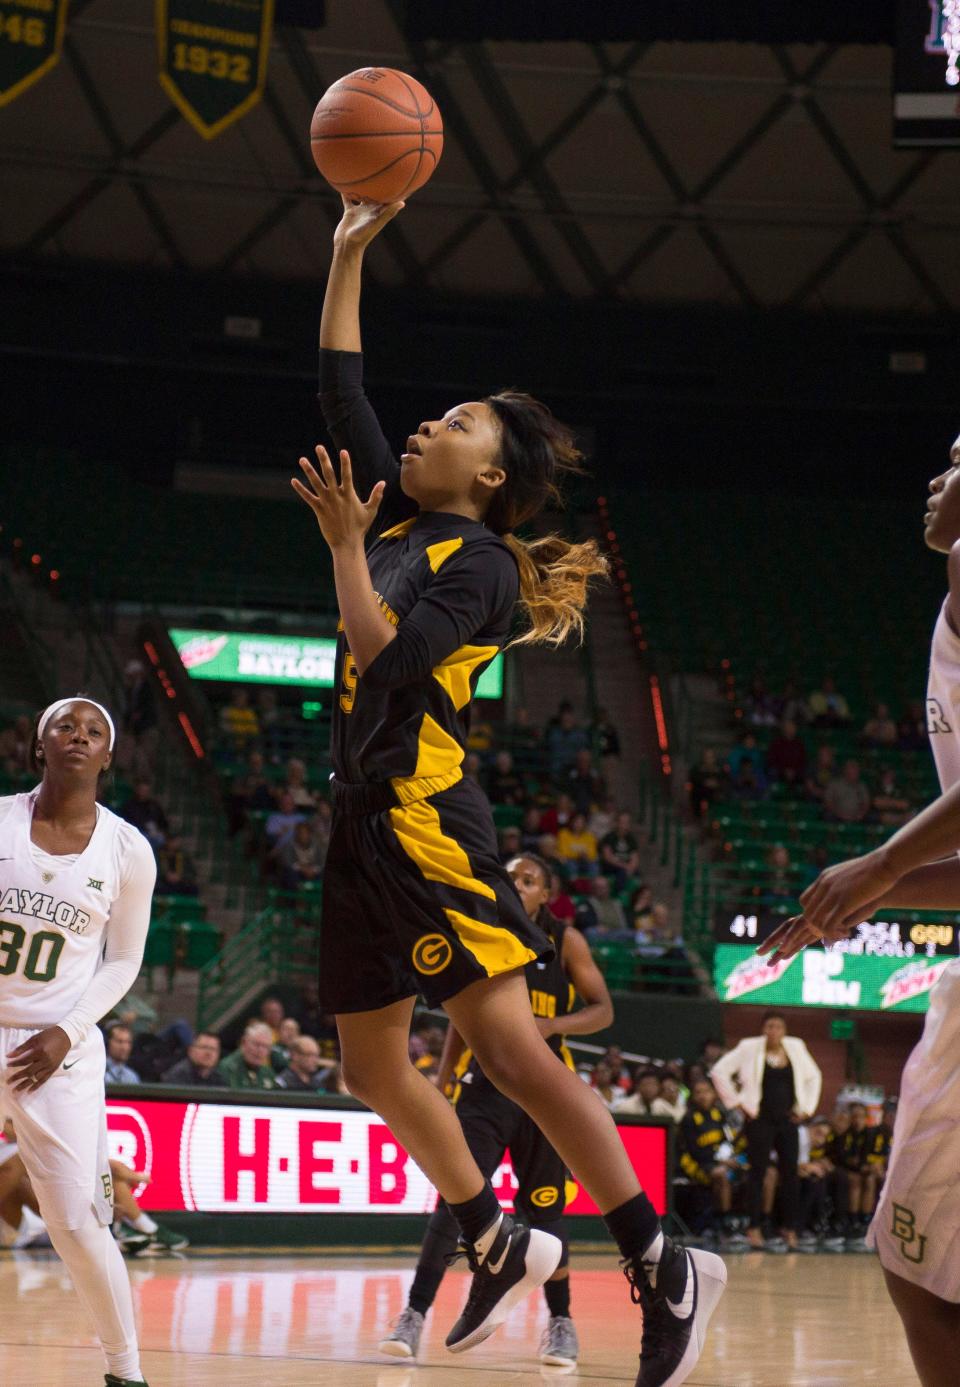 Grambling State Lady Tigers guard Shakyla Hill led her team in scoring with 16 points on Sunday.